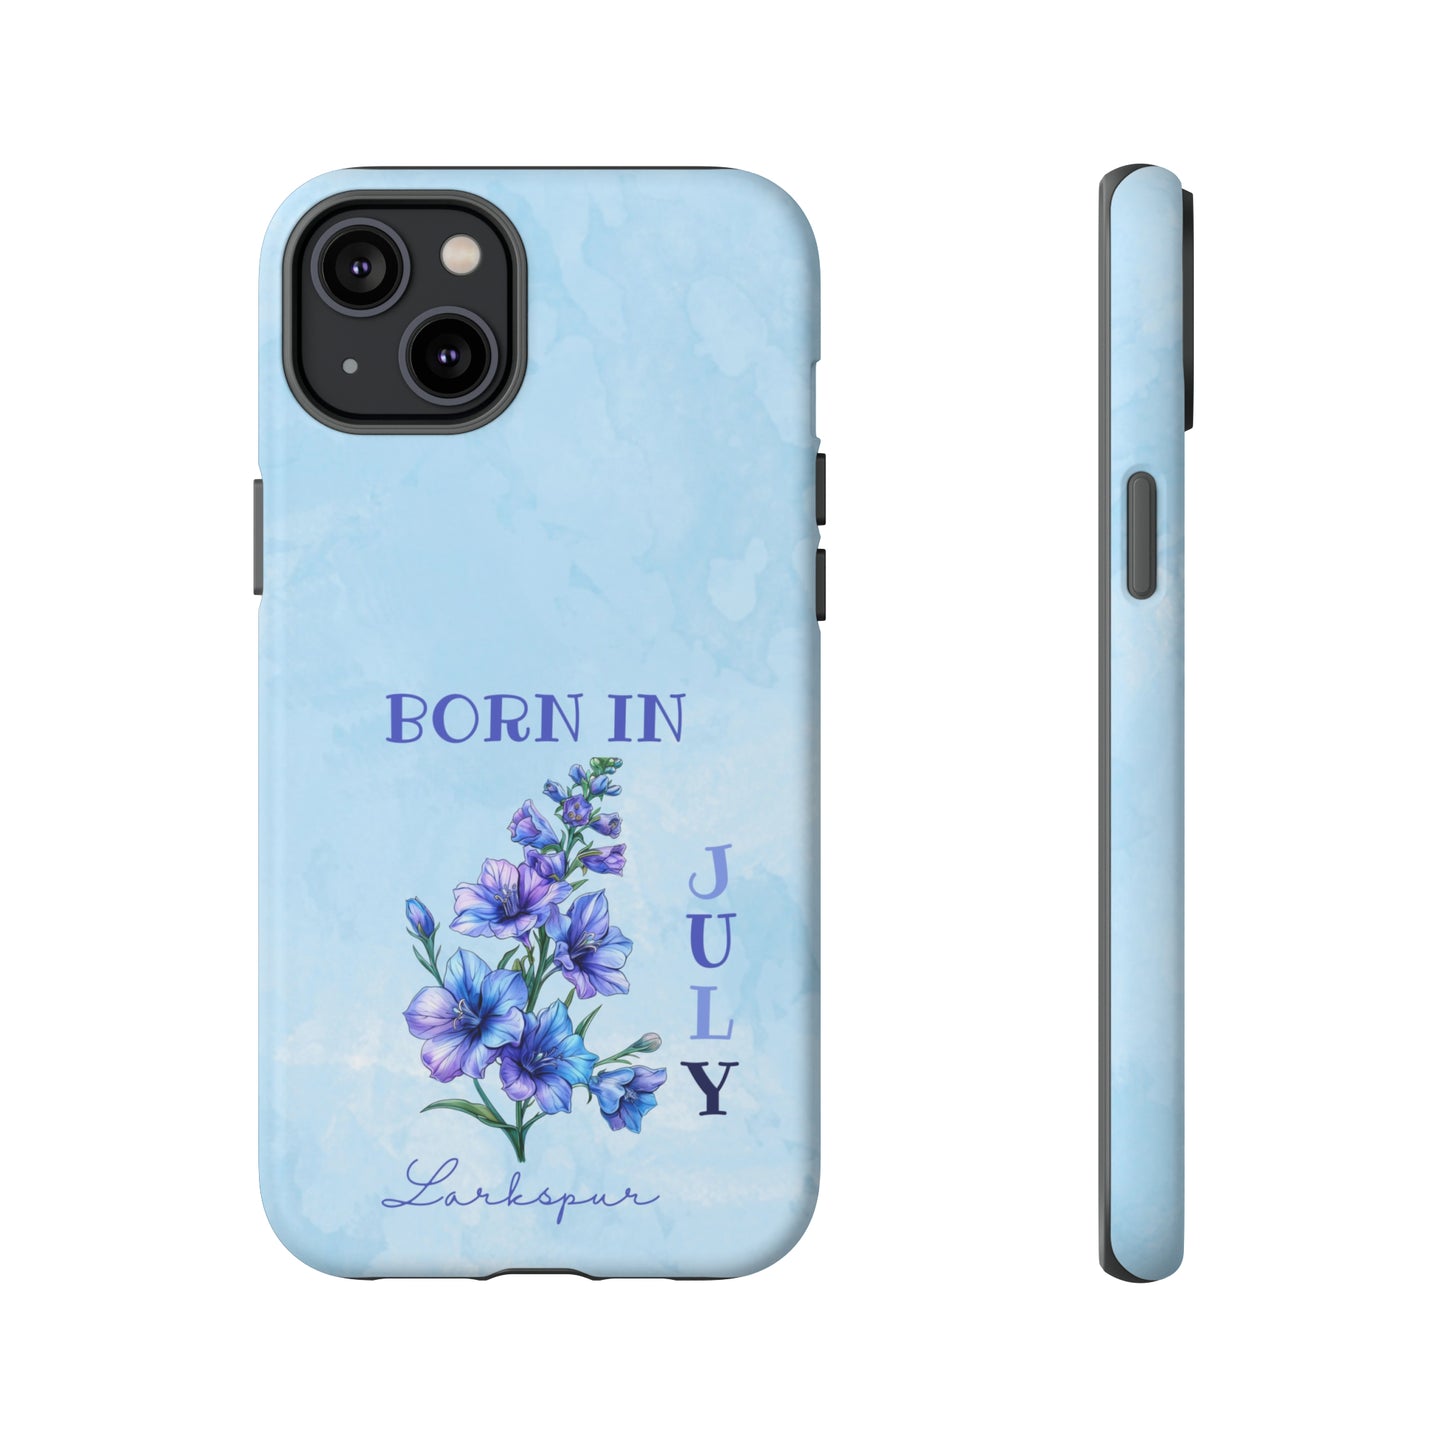 Born in July IPhone Case, July Birthday, Gift For Her